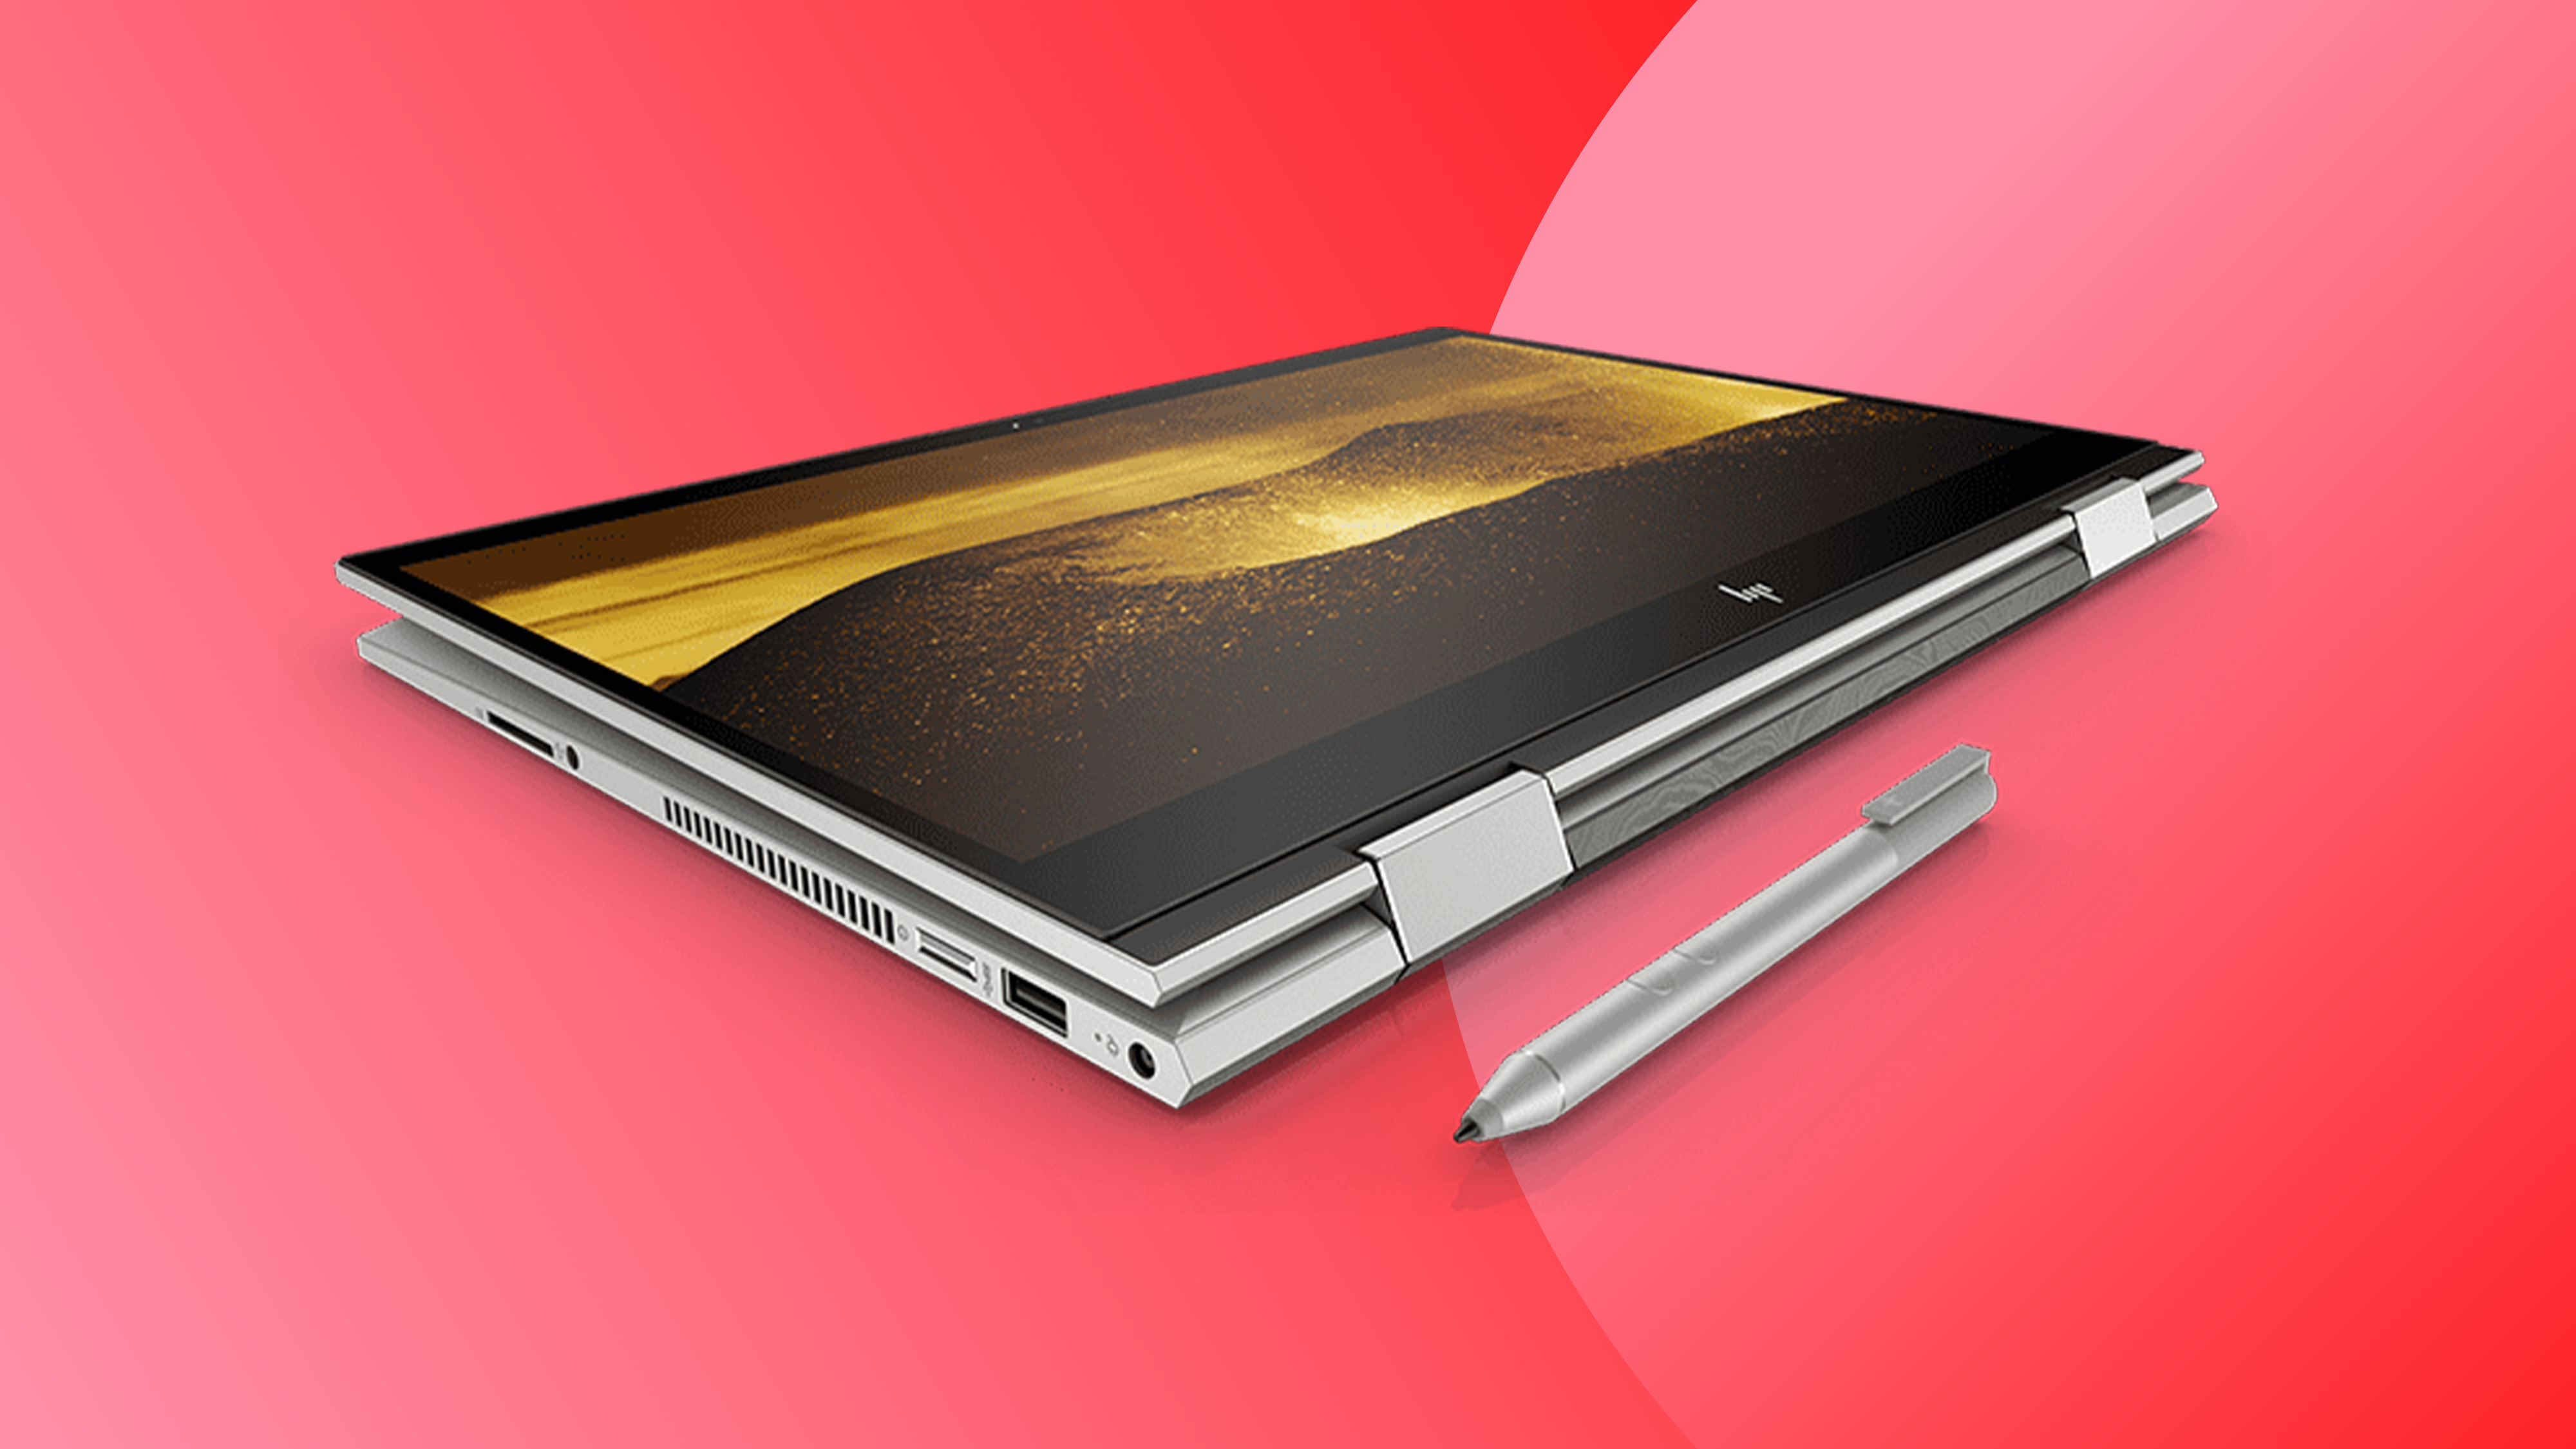 An HP Black Friday deals image with an HP Envy x360 on a red background